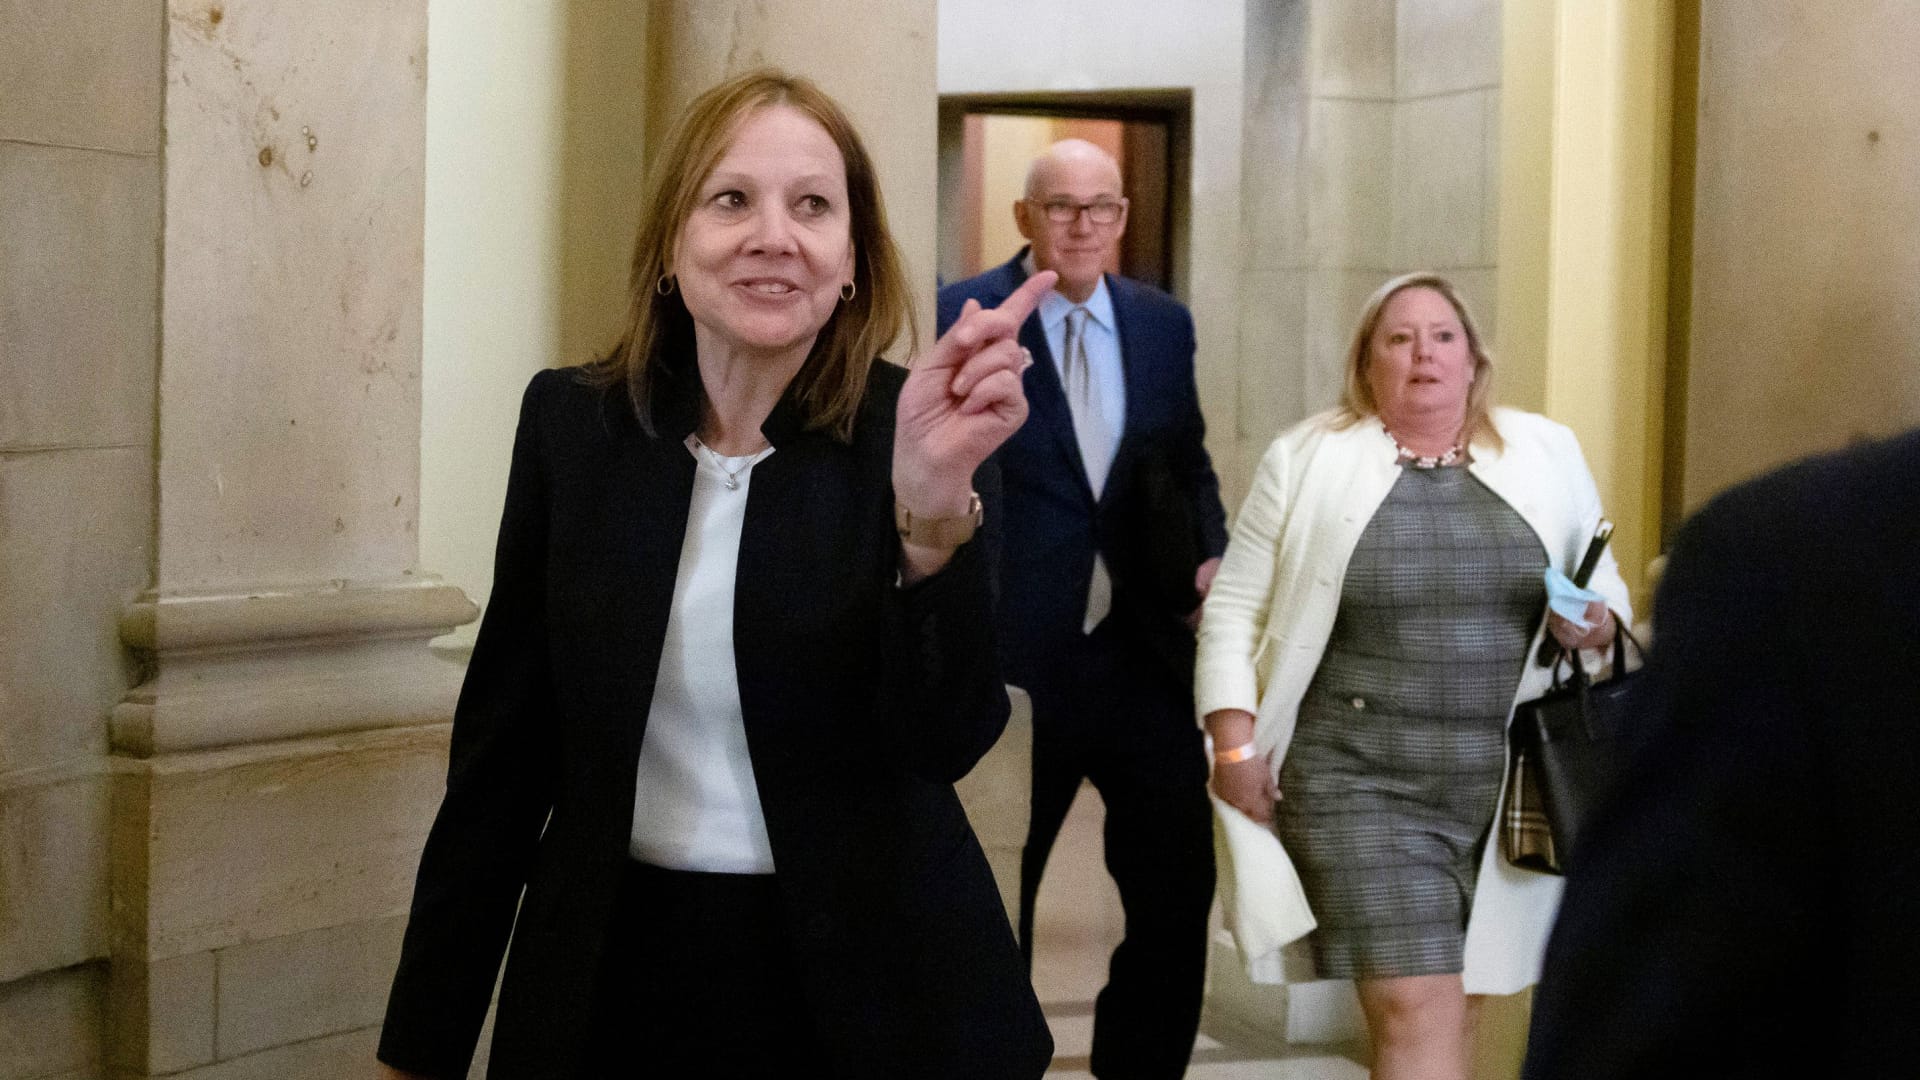 Mary Barra, CEO of General Motors, leaves after a meeting with Speaker of the House Nancy Pelosi (D-CA) at the U.S. Capitol in Washington, U.S. June 16, 2021.